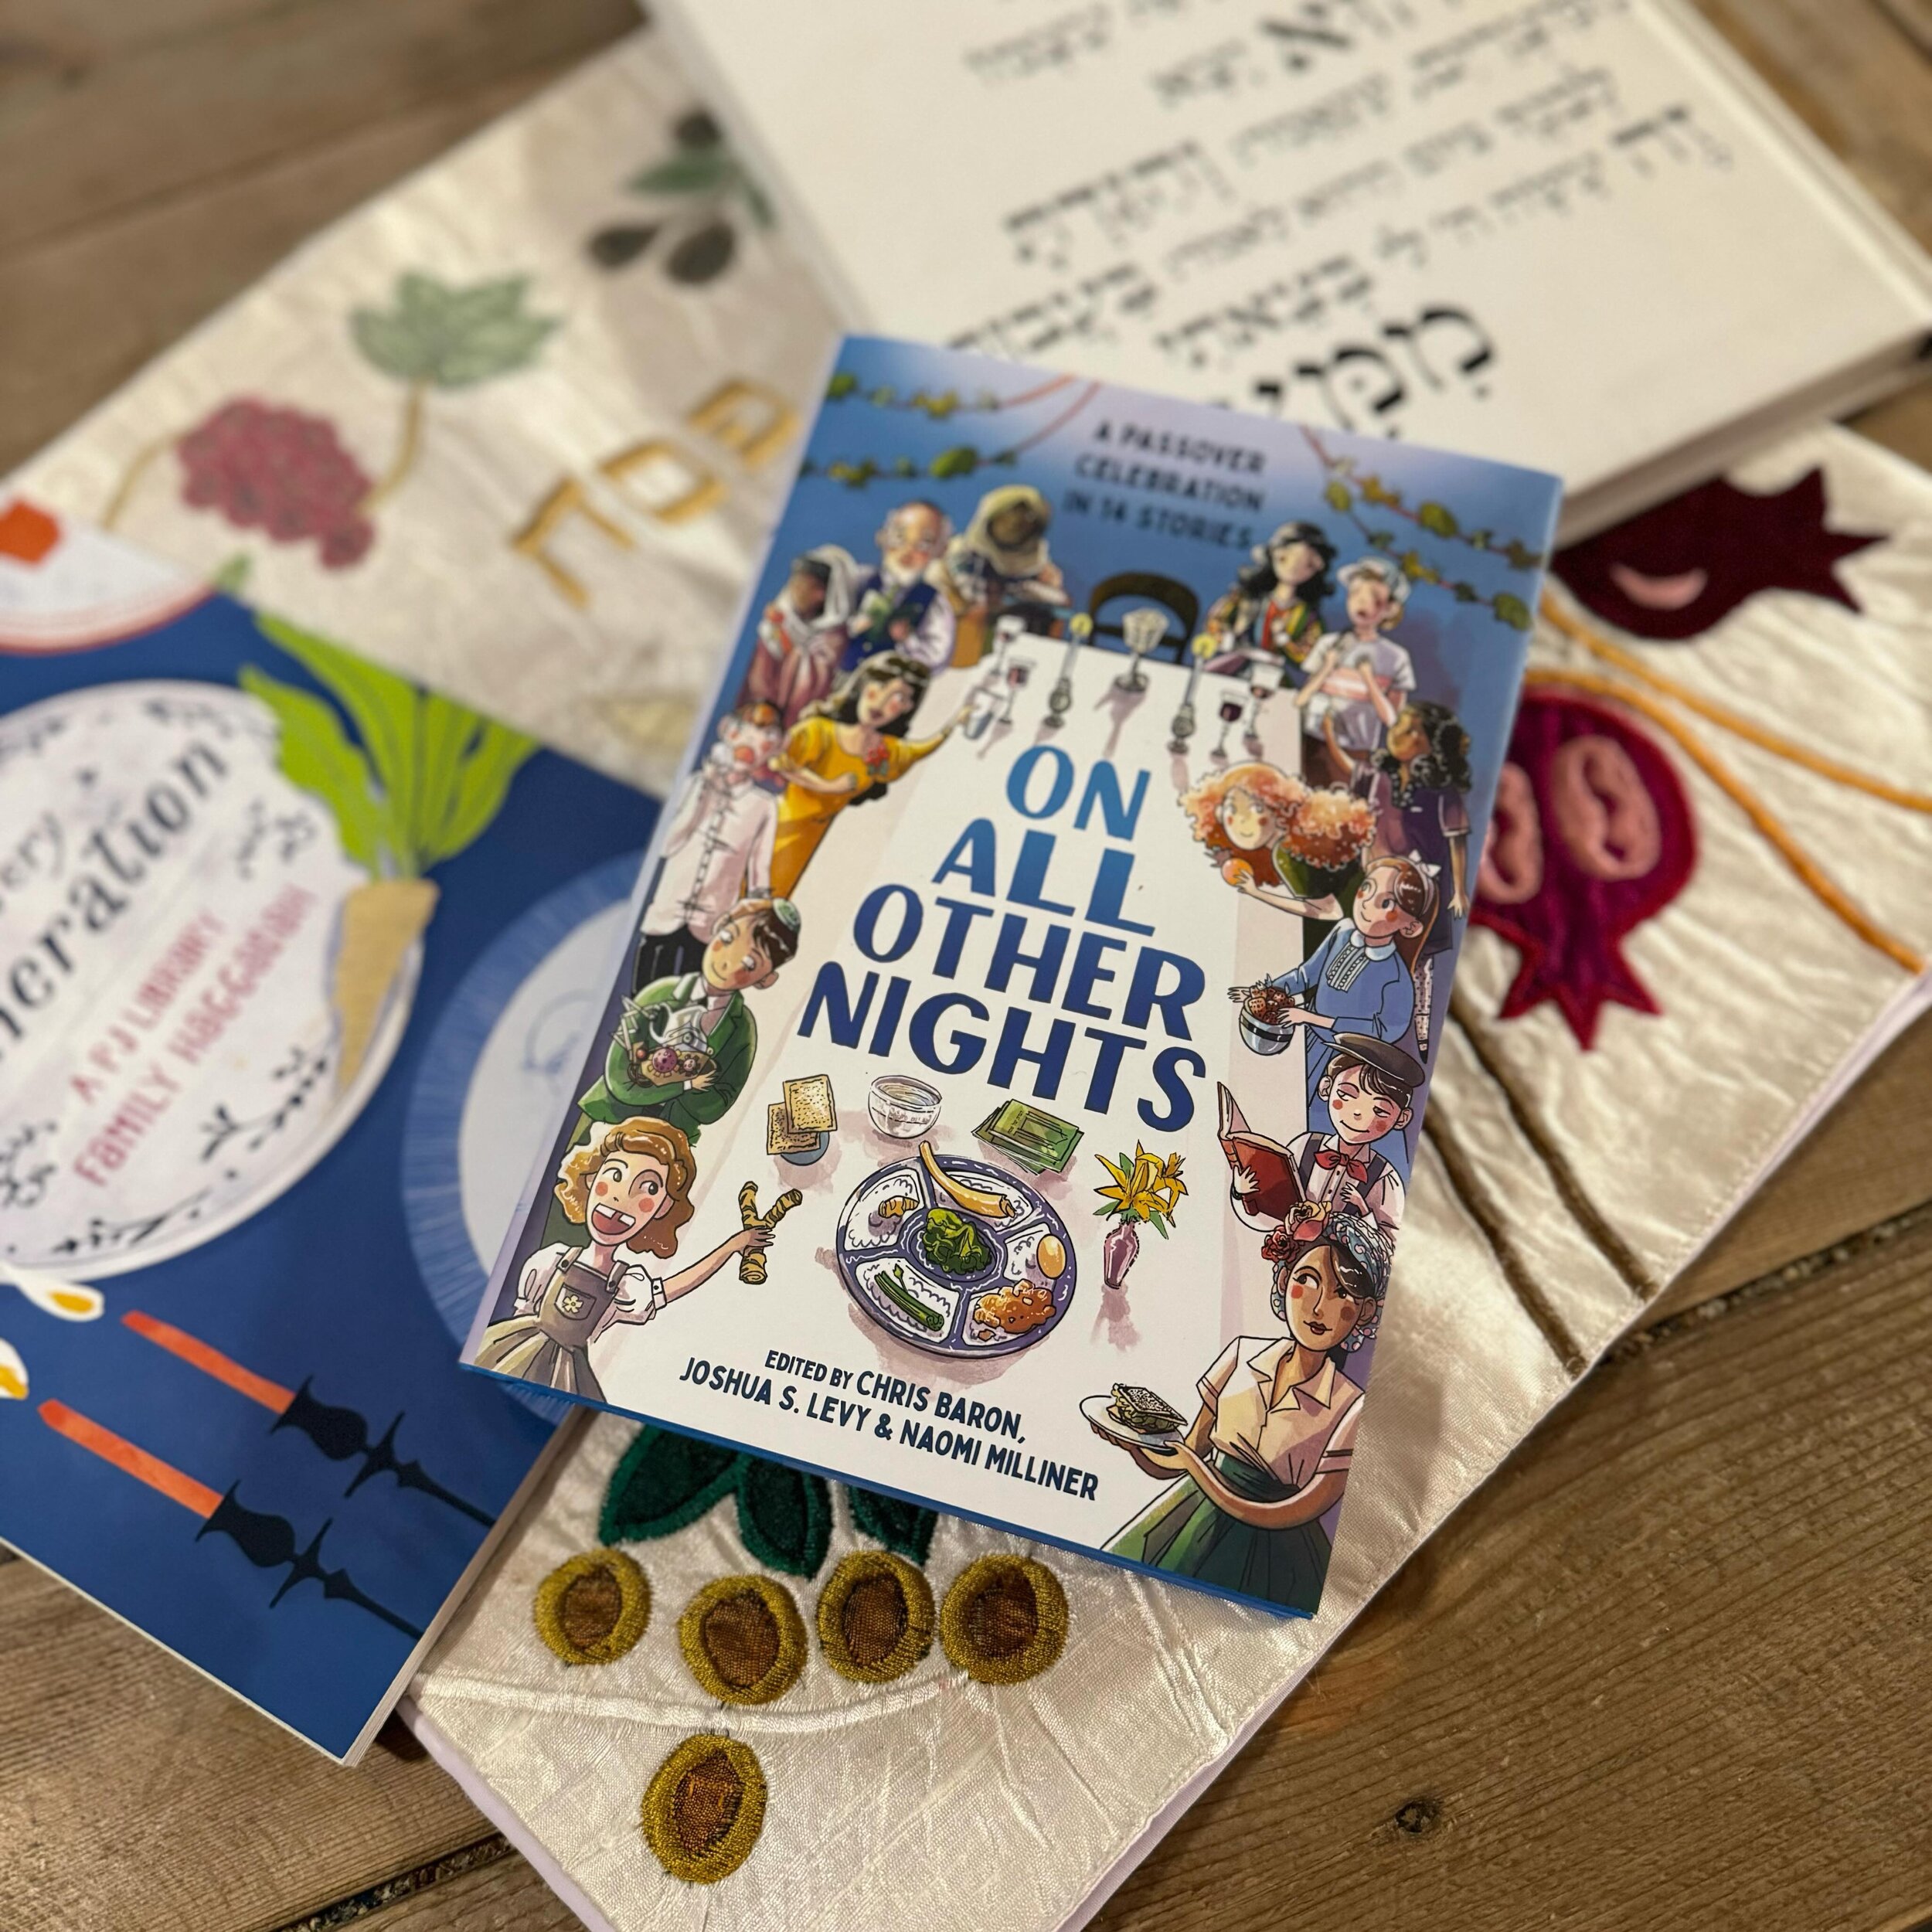 ON ALL OTHER NIGHTS: A Passover Celebration in 14 Stories is on sale today! Each story aligns with a stage of the Passover Seder. It&rsquo;s a beautiful collection of work from phenomenal Jewish kidlit authors. We hope it adds to your family&rsquo;s 